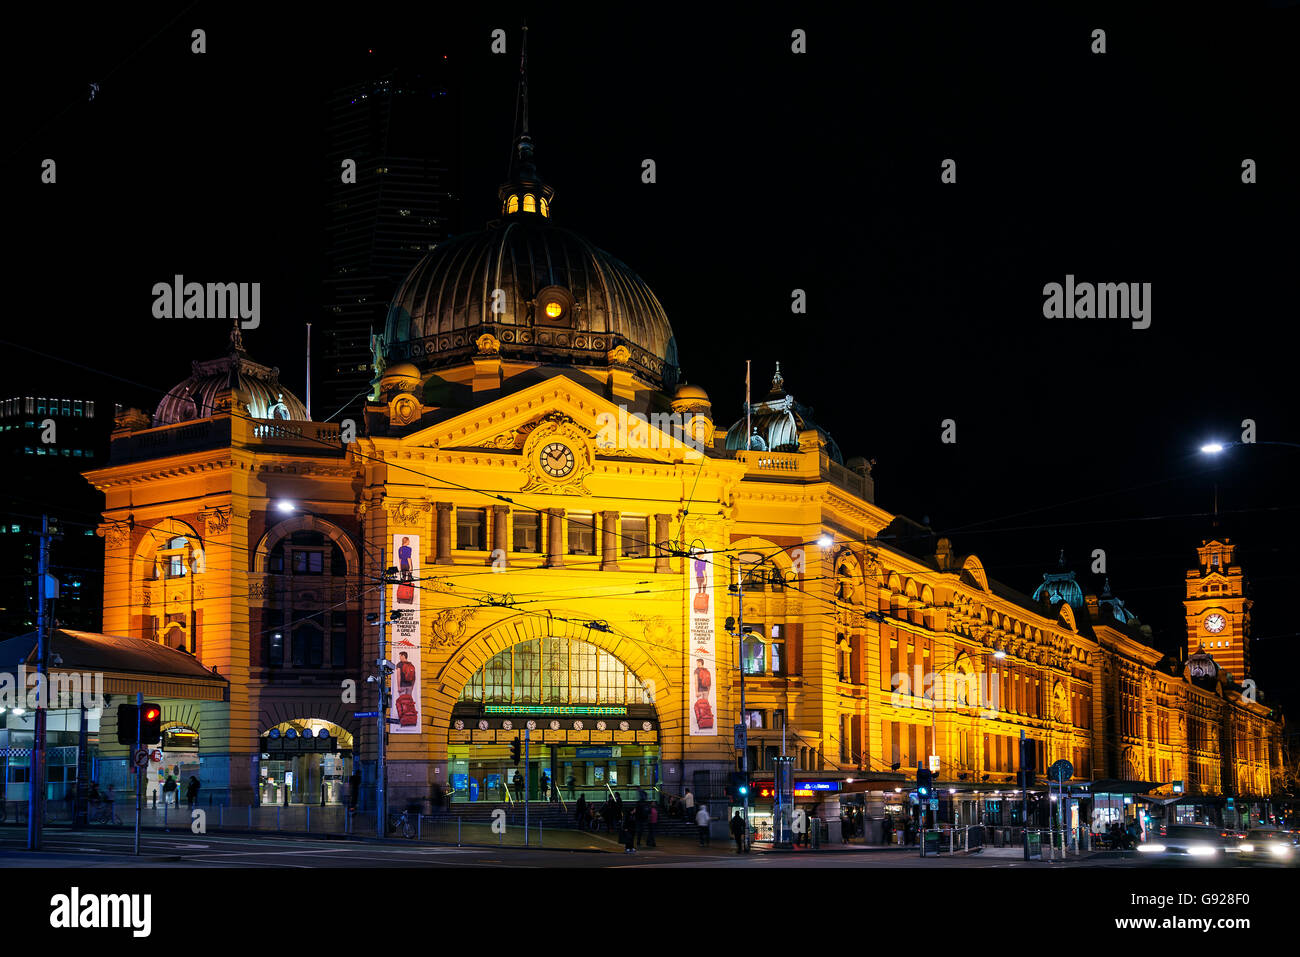 flinders street railway station in central melbourne city australia at night Stock Photo